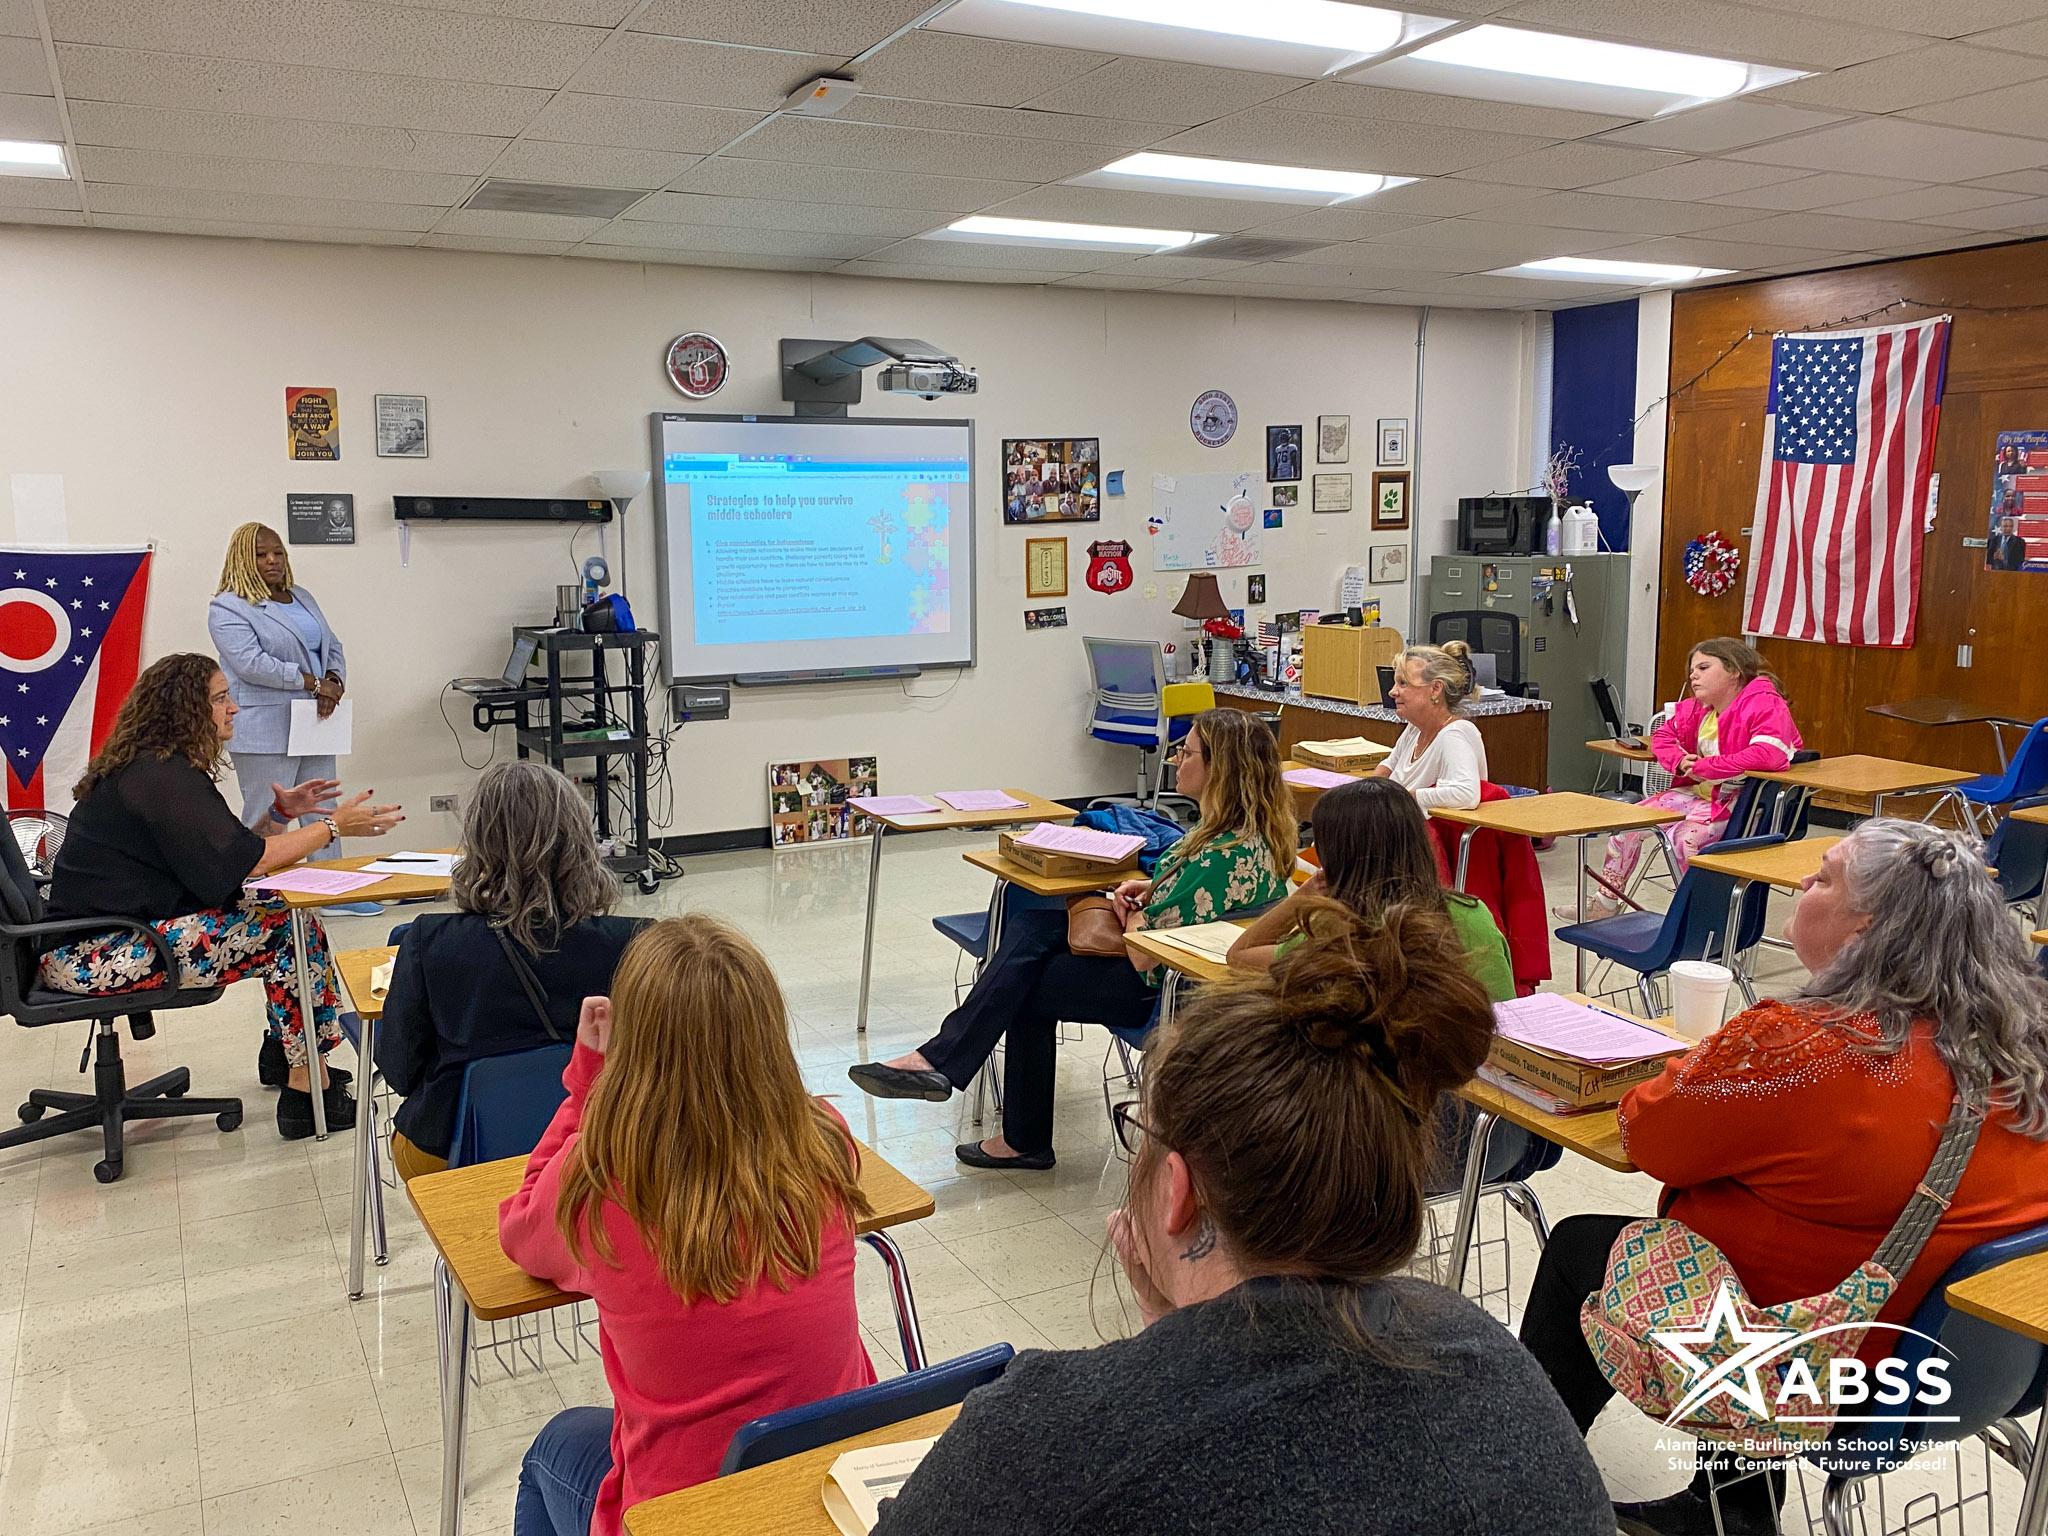 ABSS staff presents to families in a classroom at Cummings High School